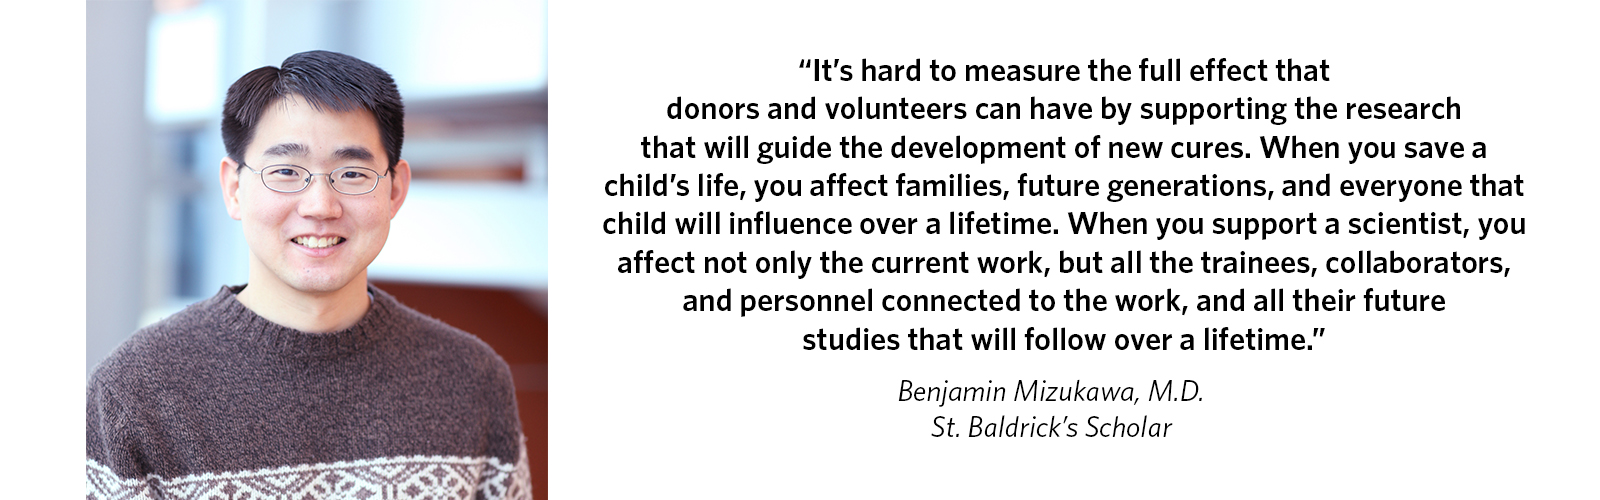 'It’s hard to measure the full effect that donors and volunteers can have by supporting the research that will guide the development of new cures. When you save a child’s life, you affect families, future generations, and everyone that child will influence over a lifetime. When you support a scientist, you affect not only the current work, but all the trainees, collaborators, and personnel connected to the work, and all their future studies that will follow over a lifetime.' Benjamin Mizukawa, M.D., St. Baldrick's Scholar